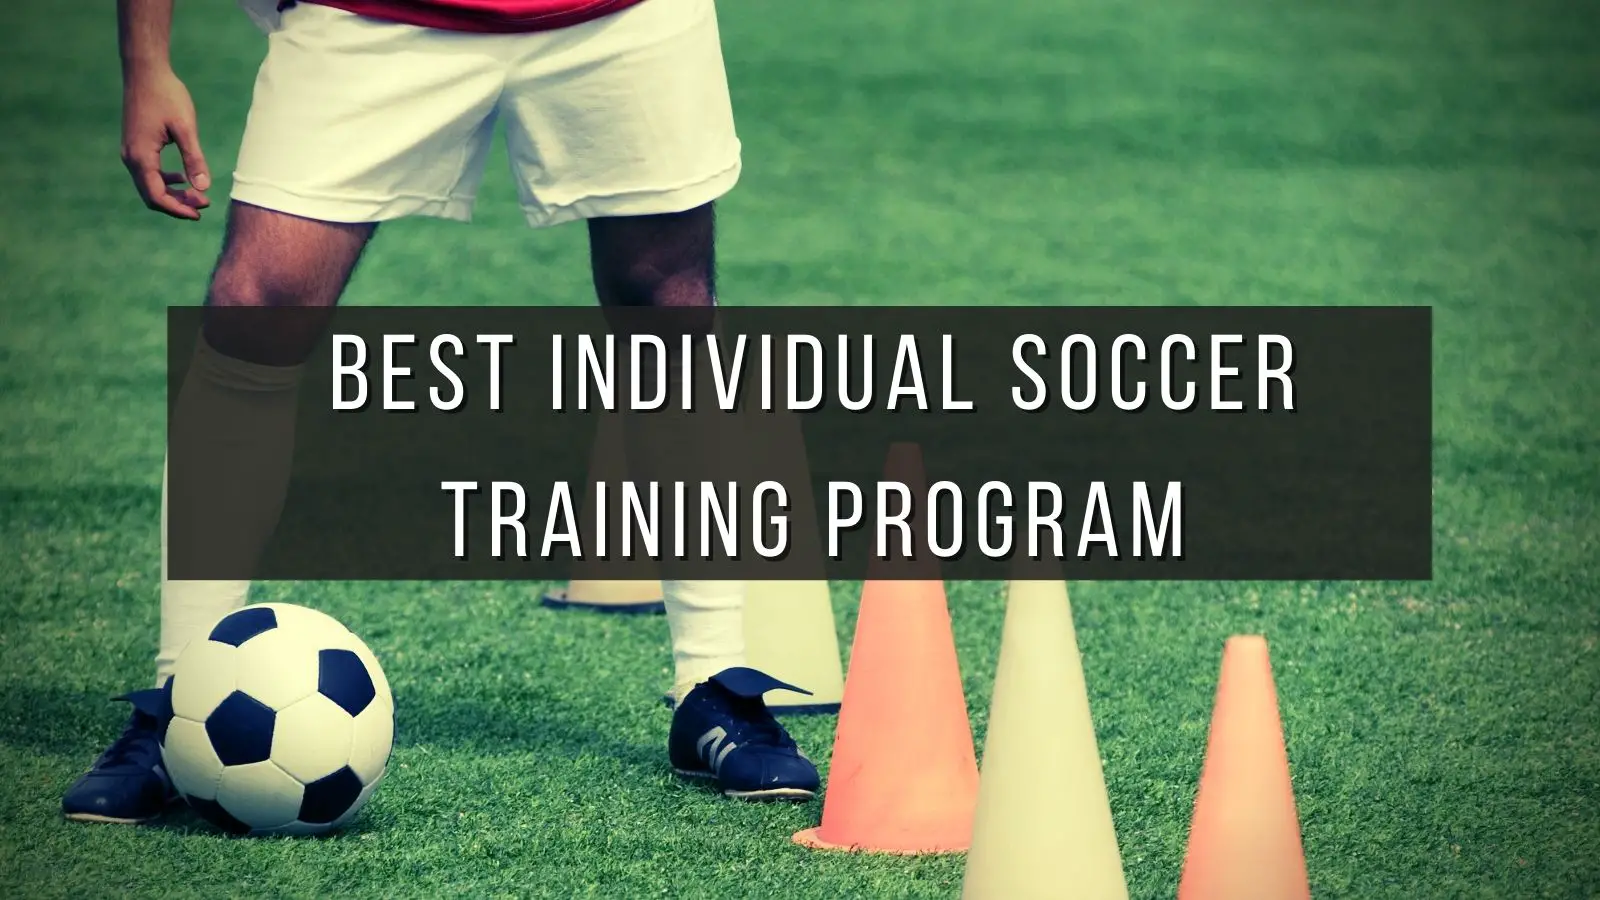 The Best Individual Soccer Training Program For Aspiring Professional Players